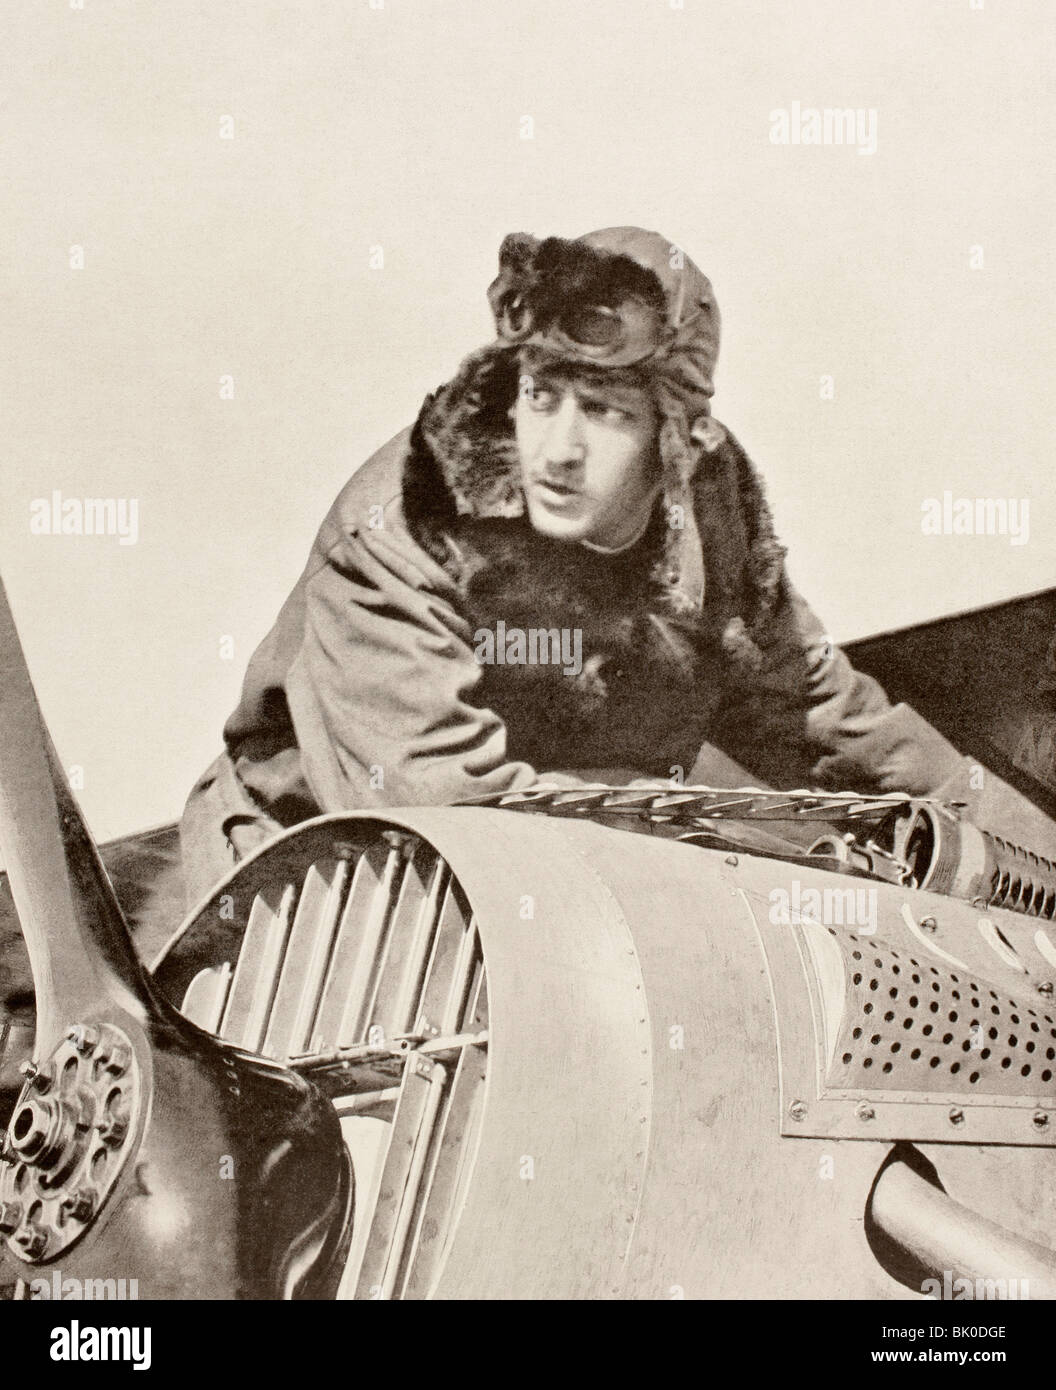 Georges Guynemer 1894 - 1917. Fighter ace and French national hero during World War I. Stock Photo